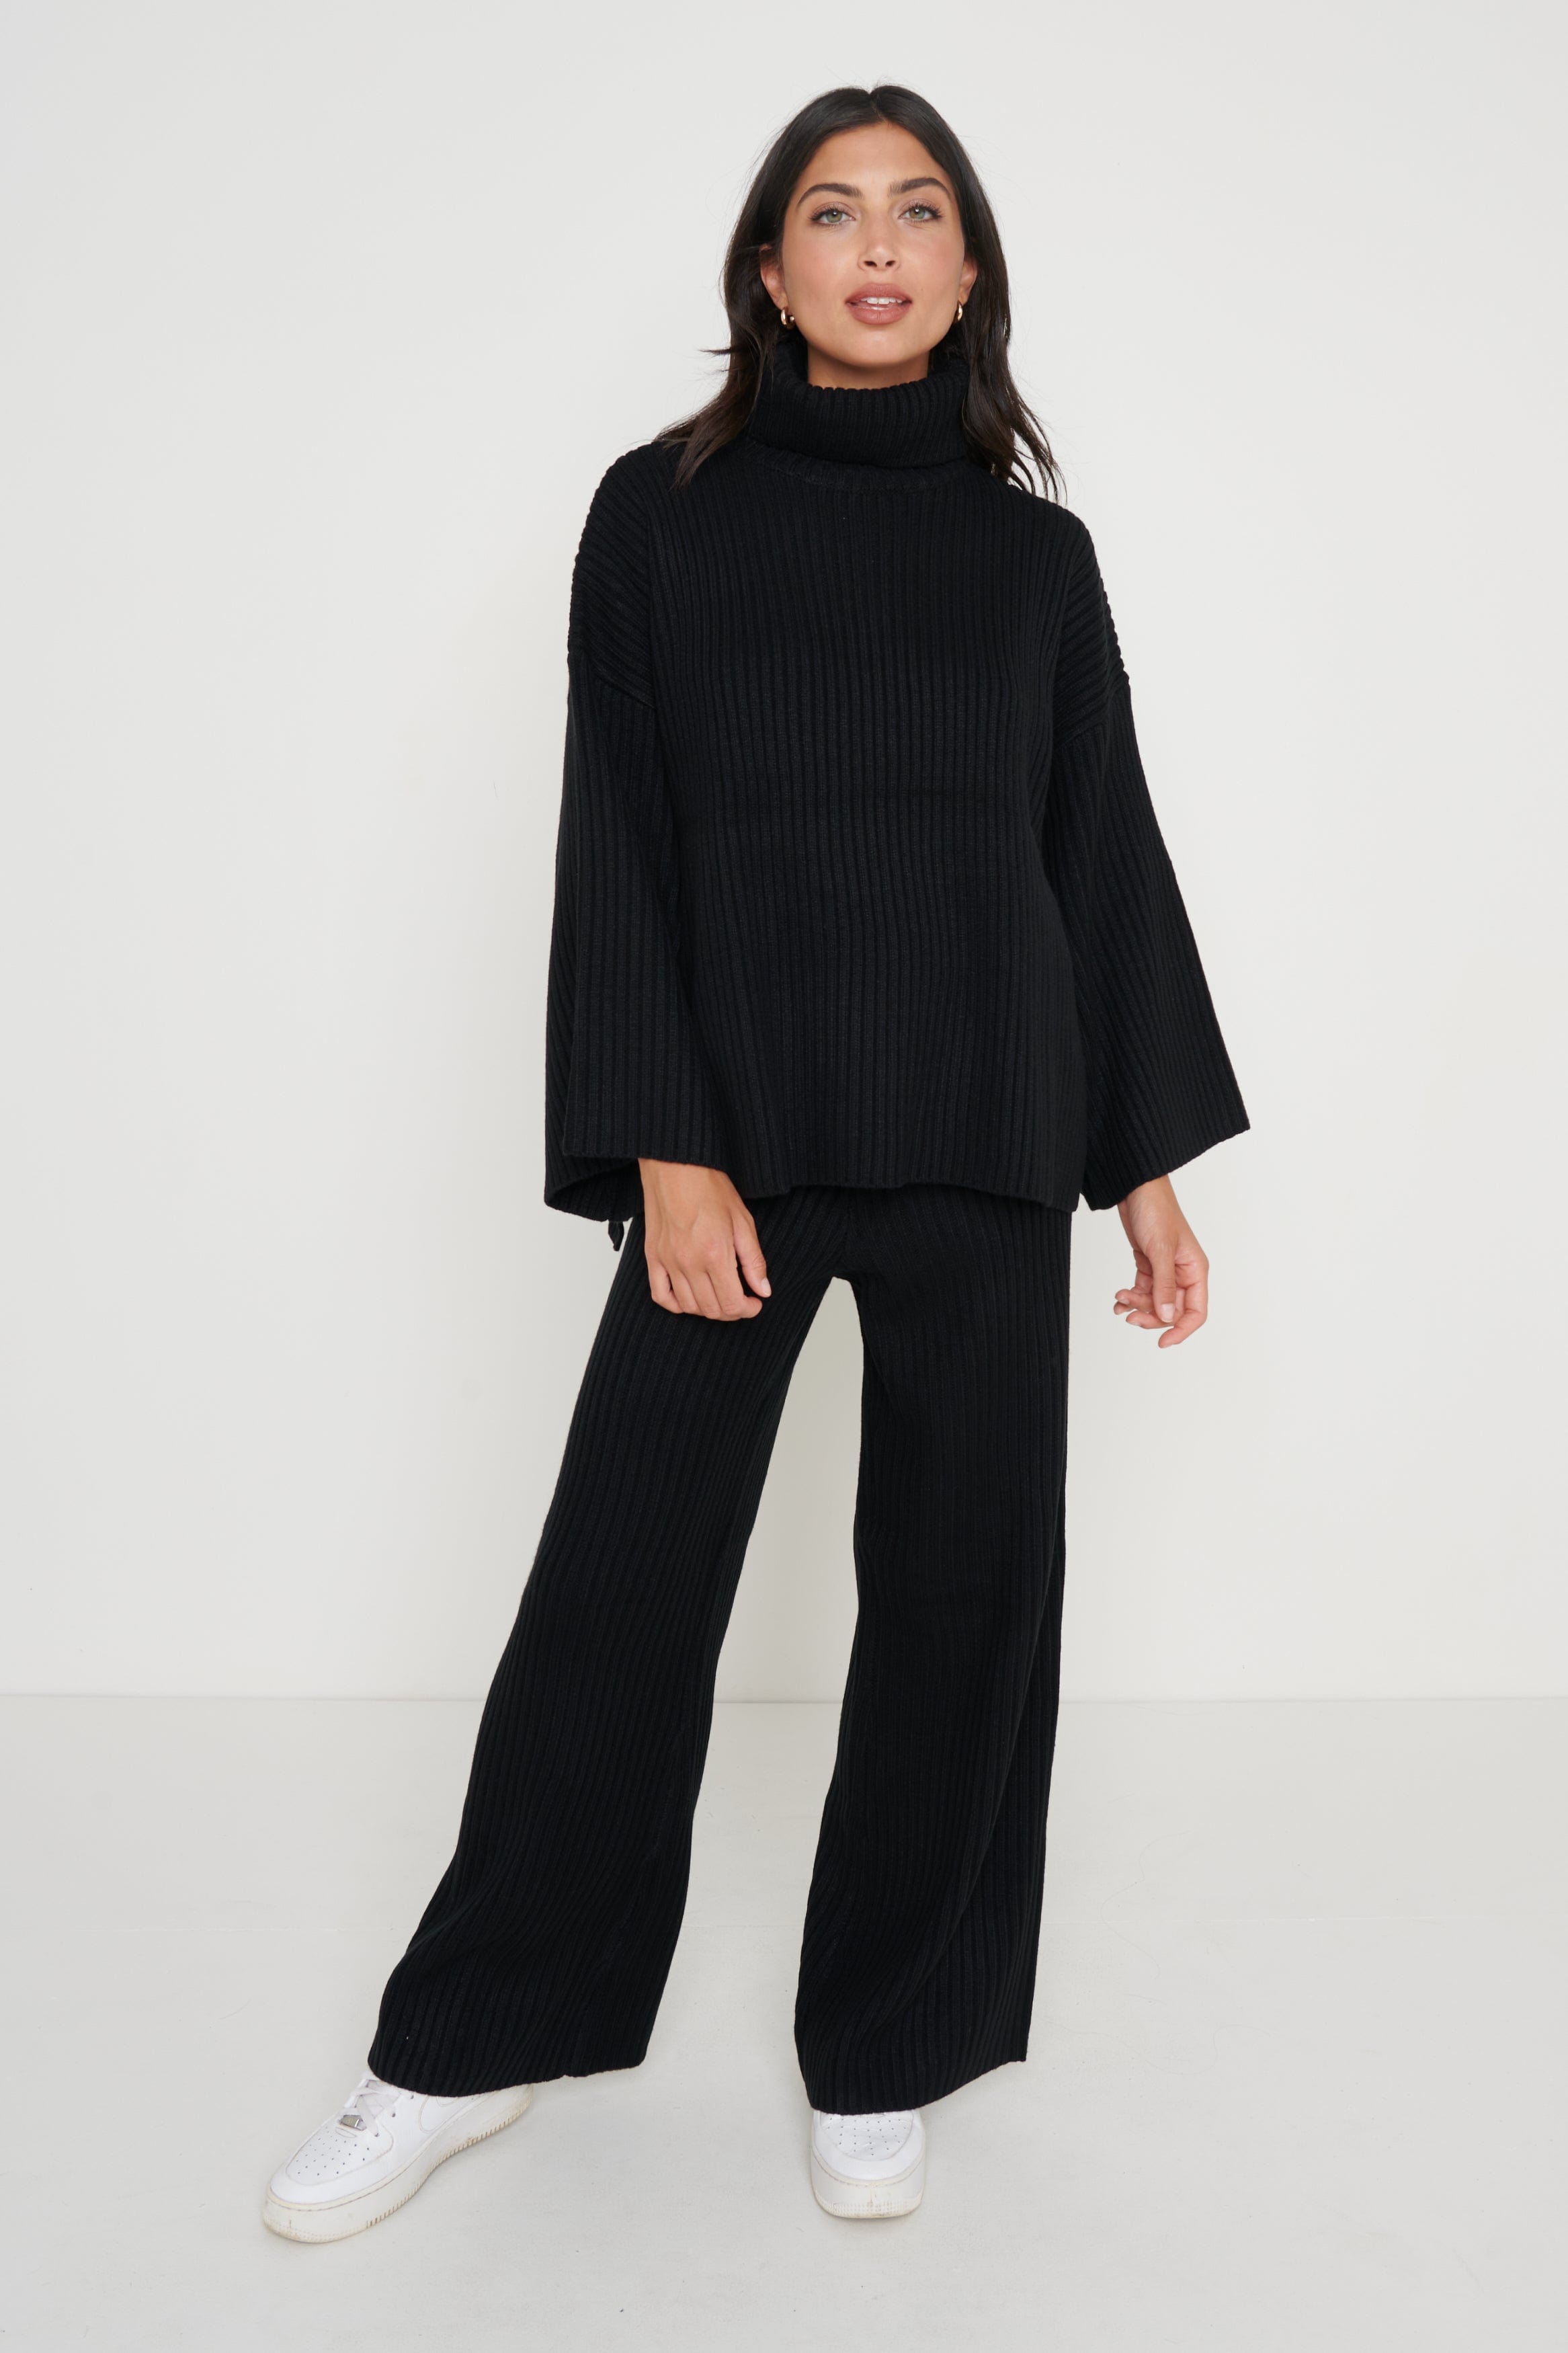 Lina Ribbed Trousers- Black, XL